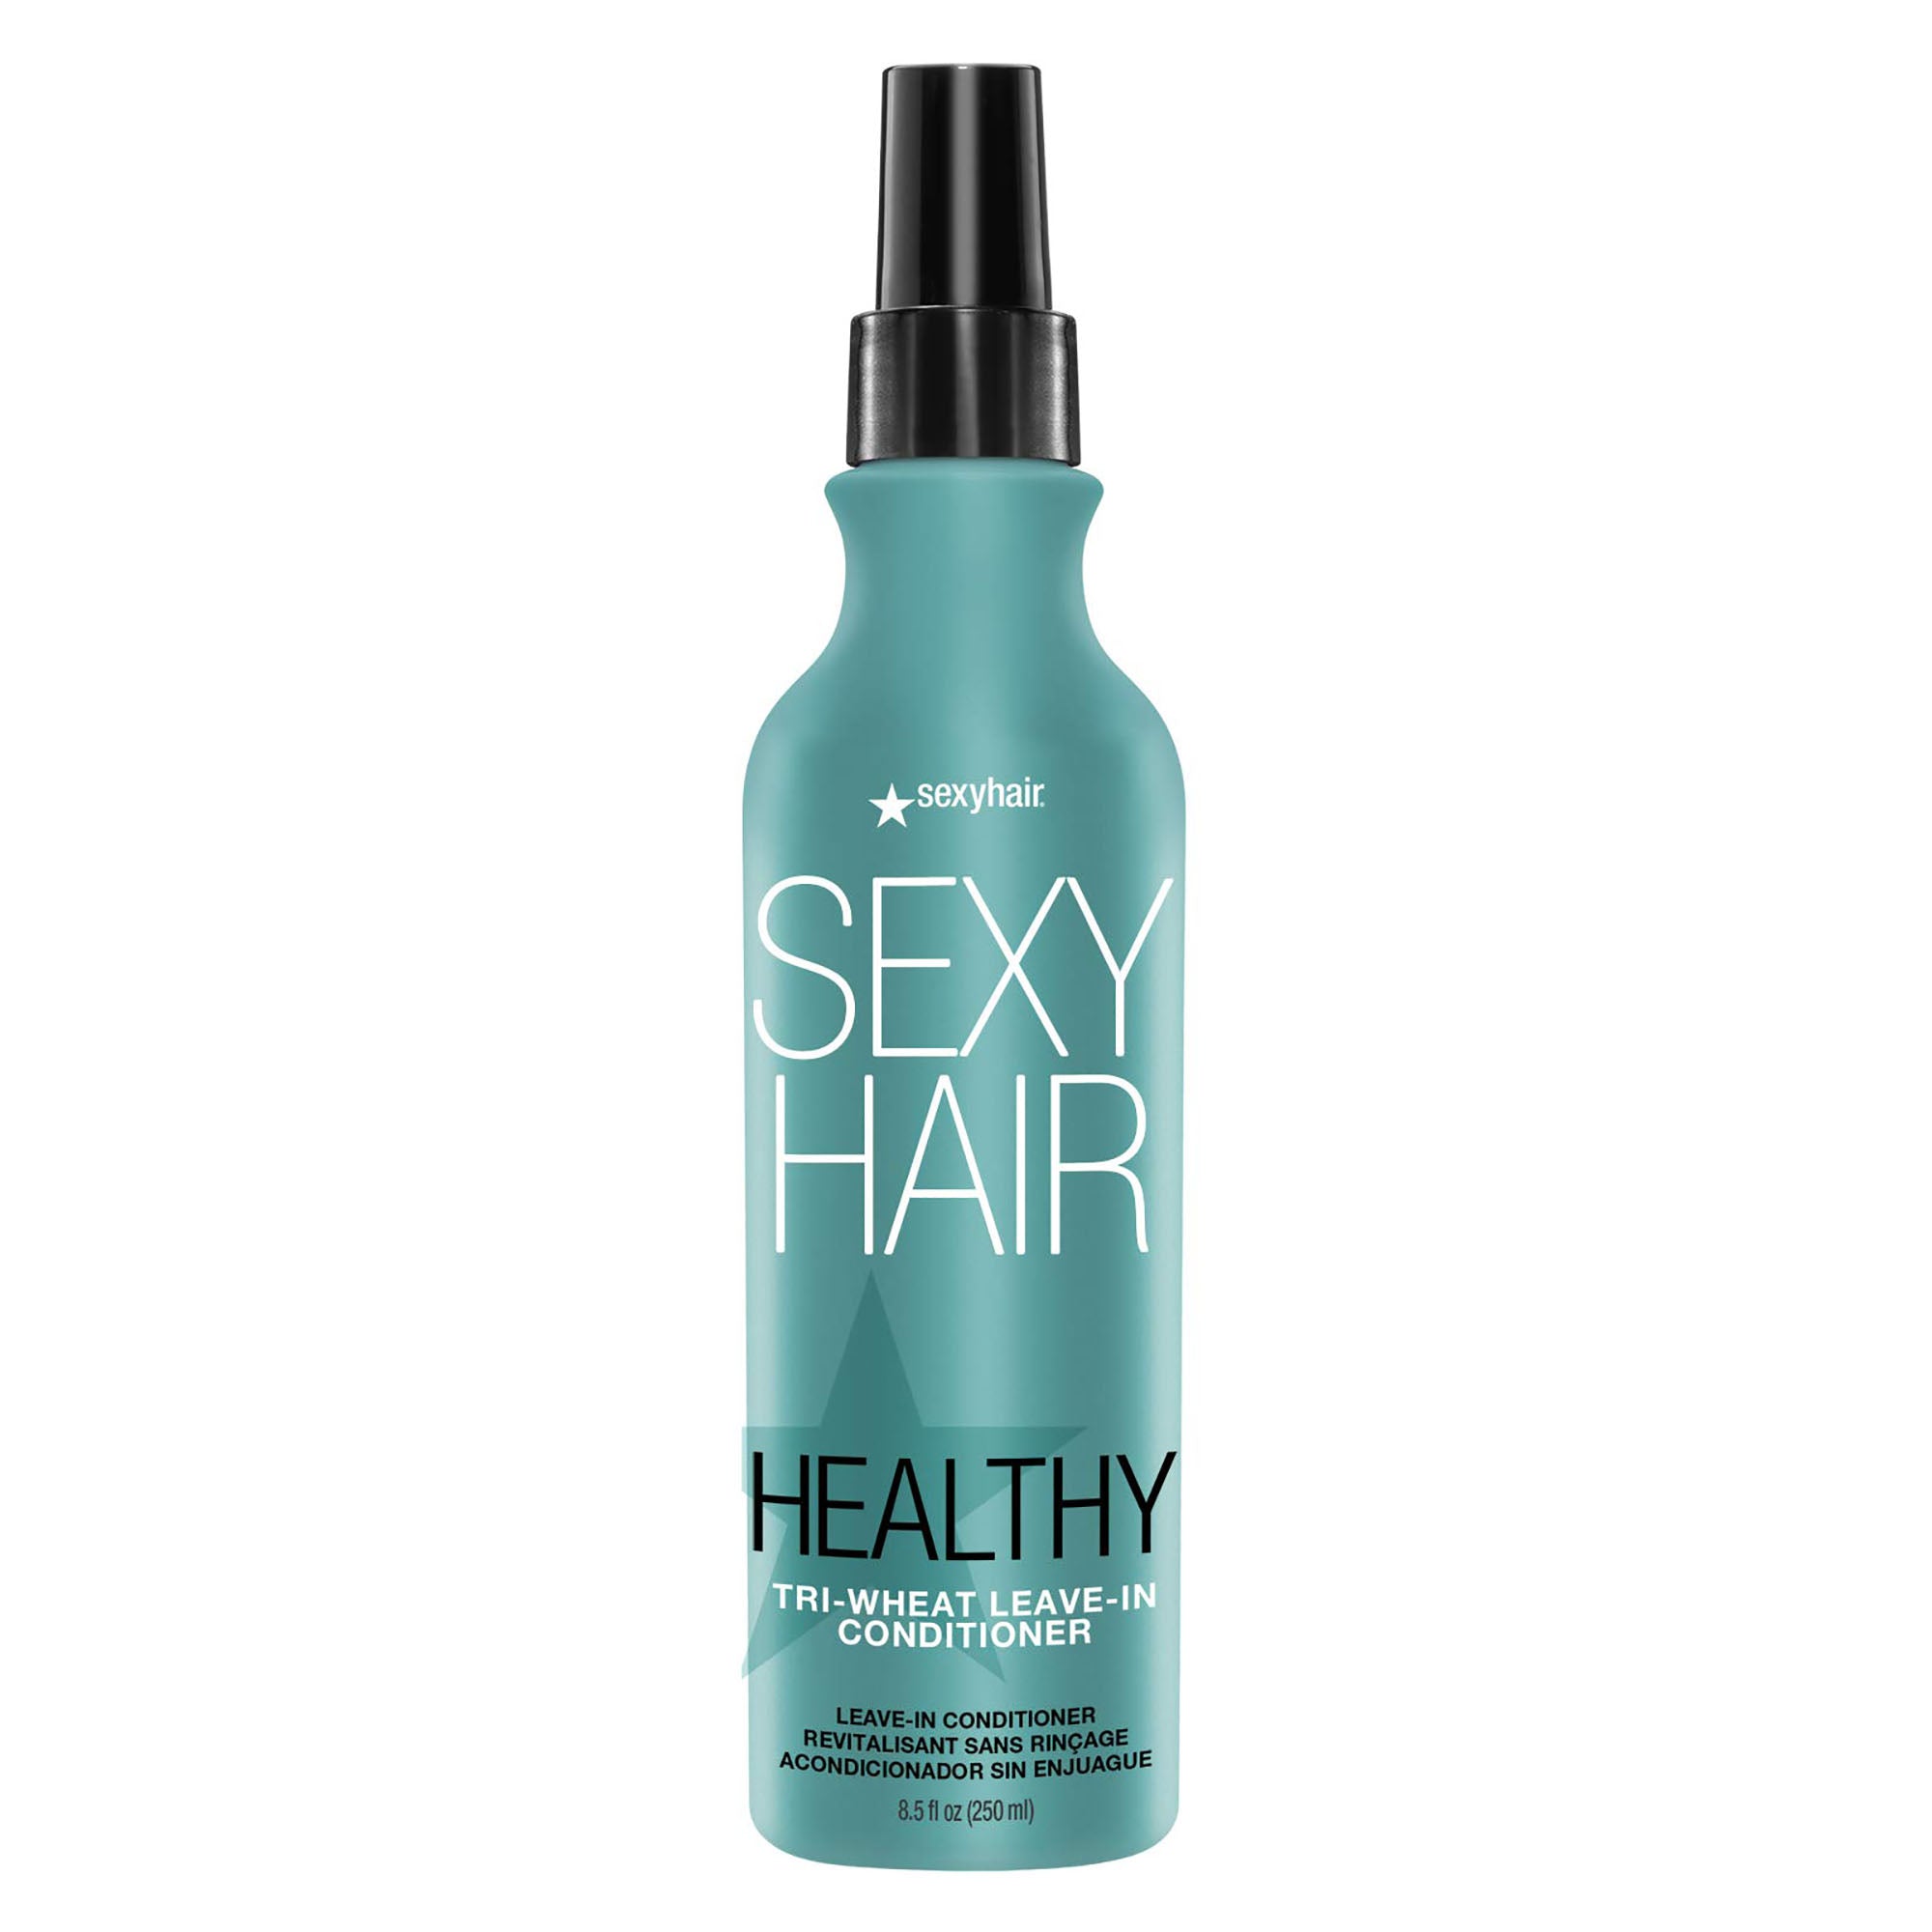 Sexy Hair Healthy SexyHair Tri-Wheat Leave-In Conditioner / 8.5